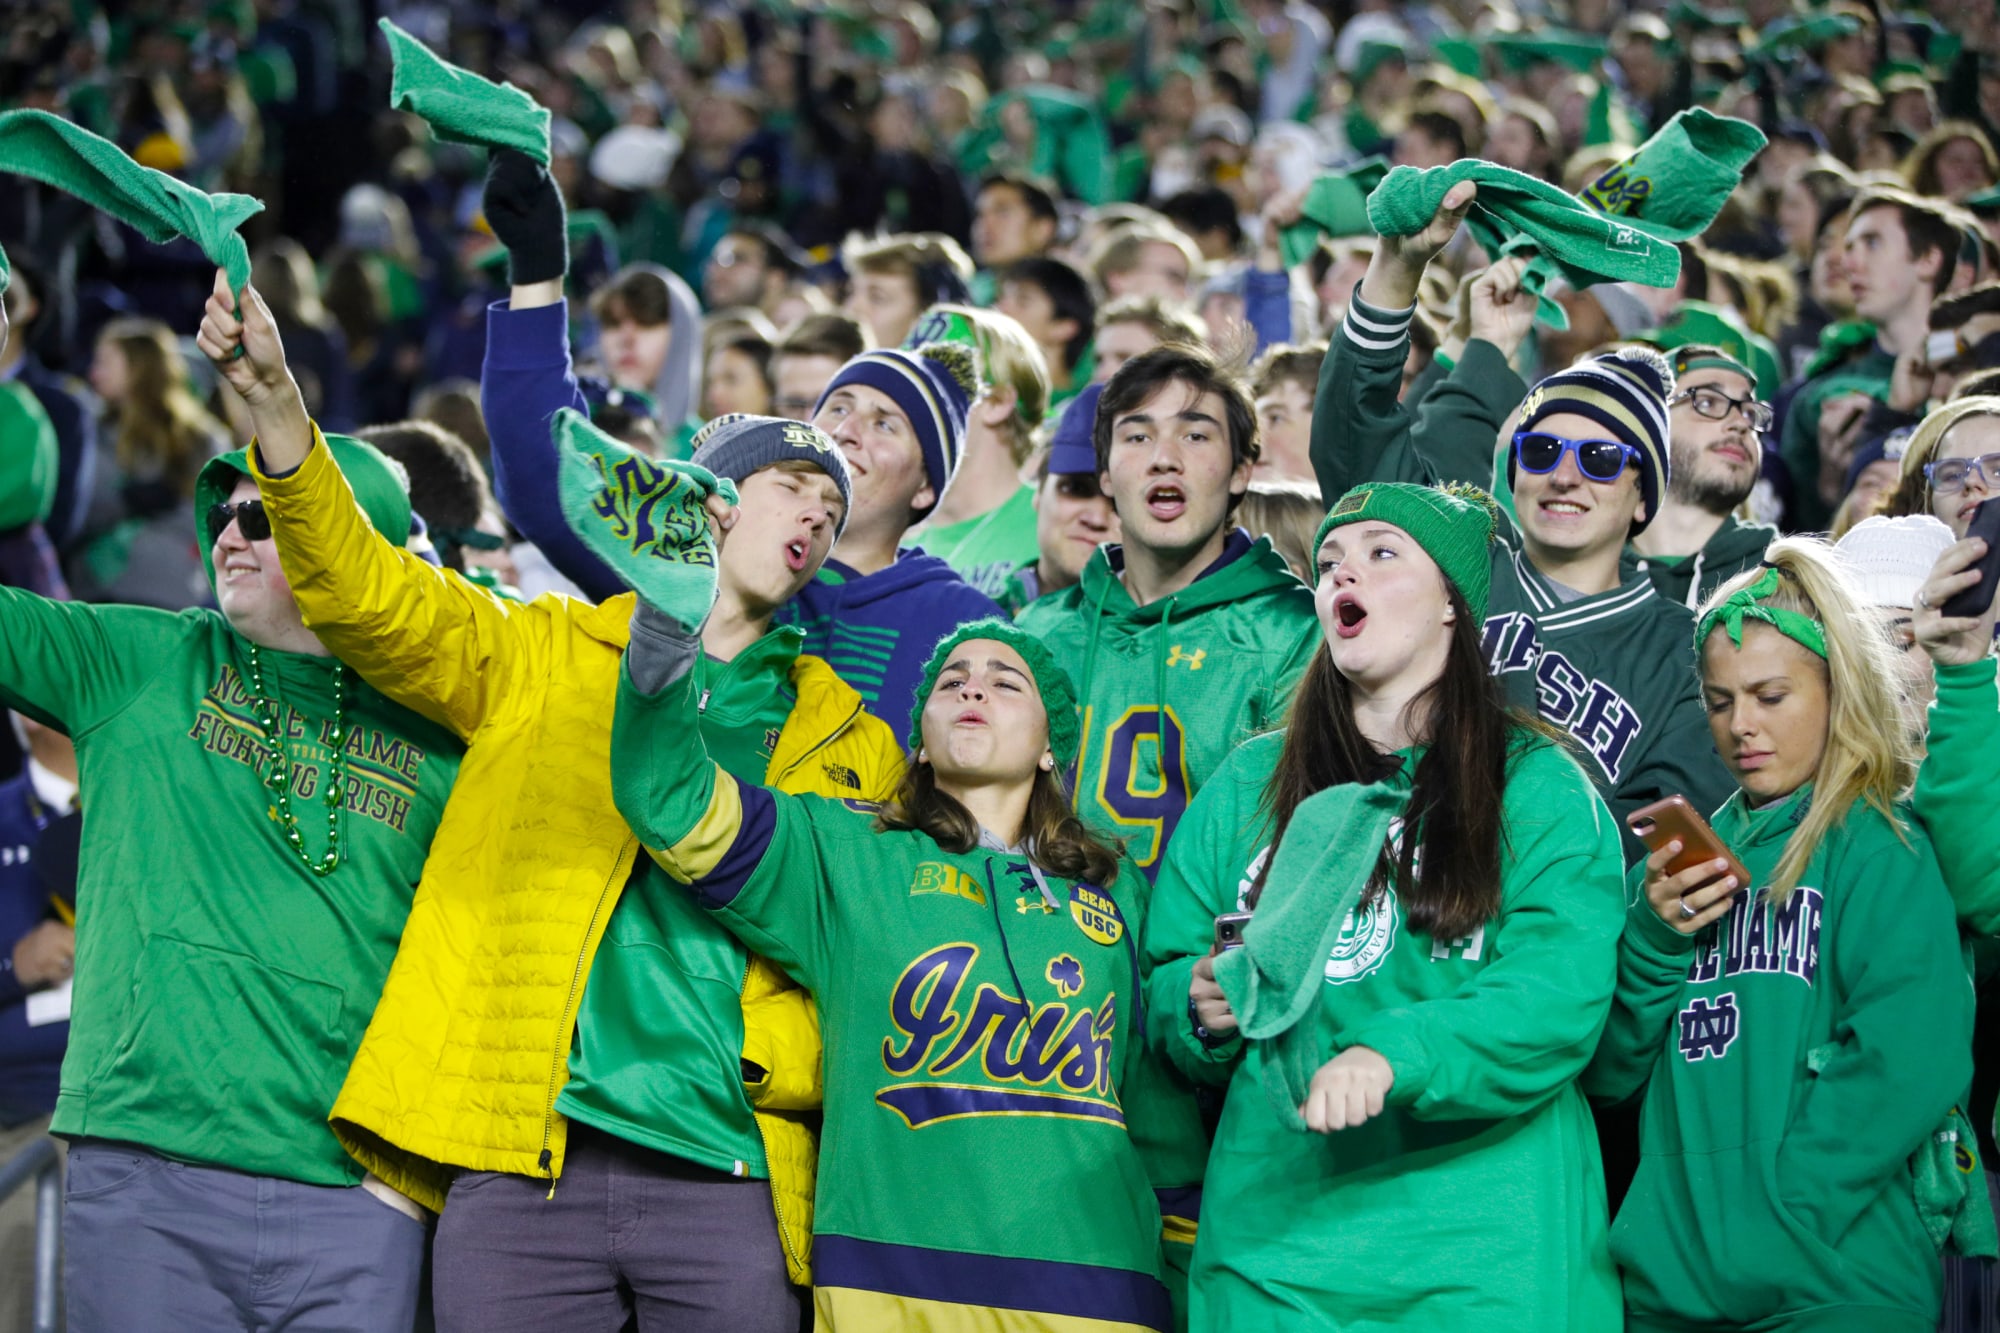 Students returning to campus will decide fate of college football